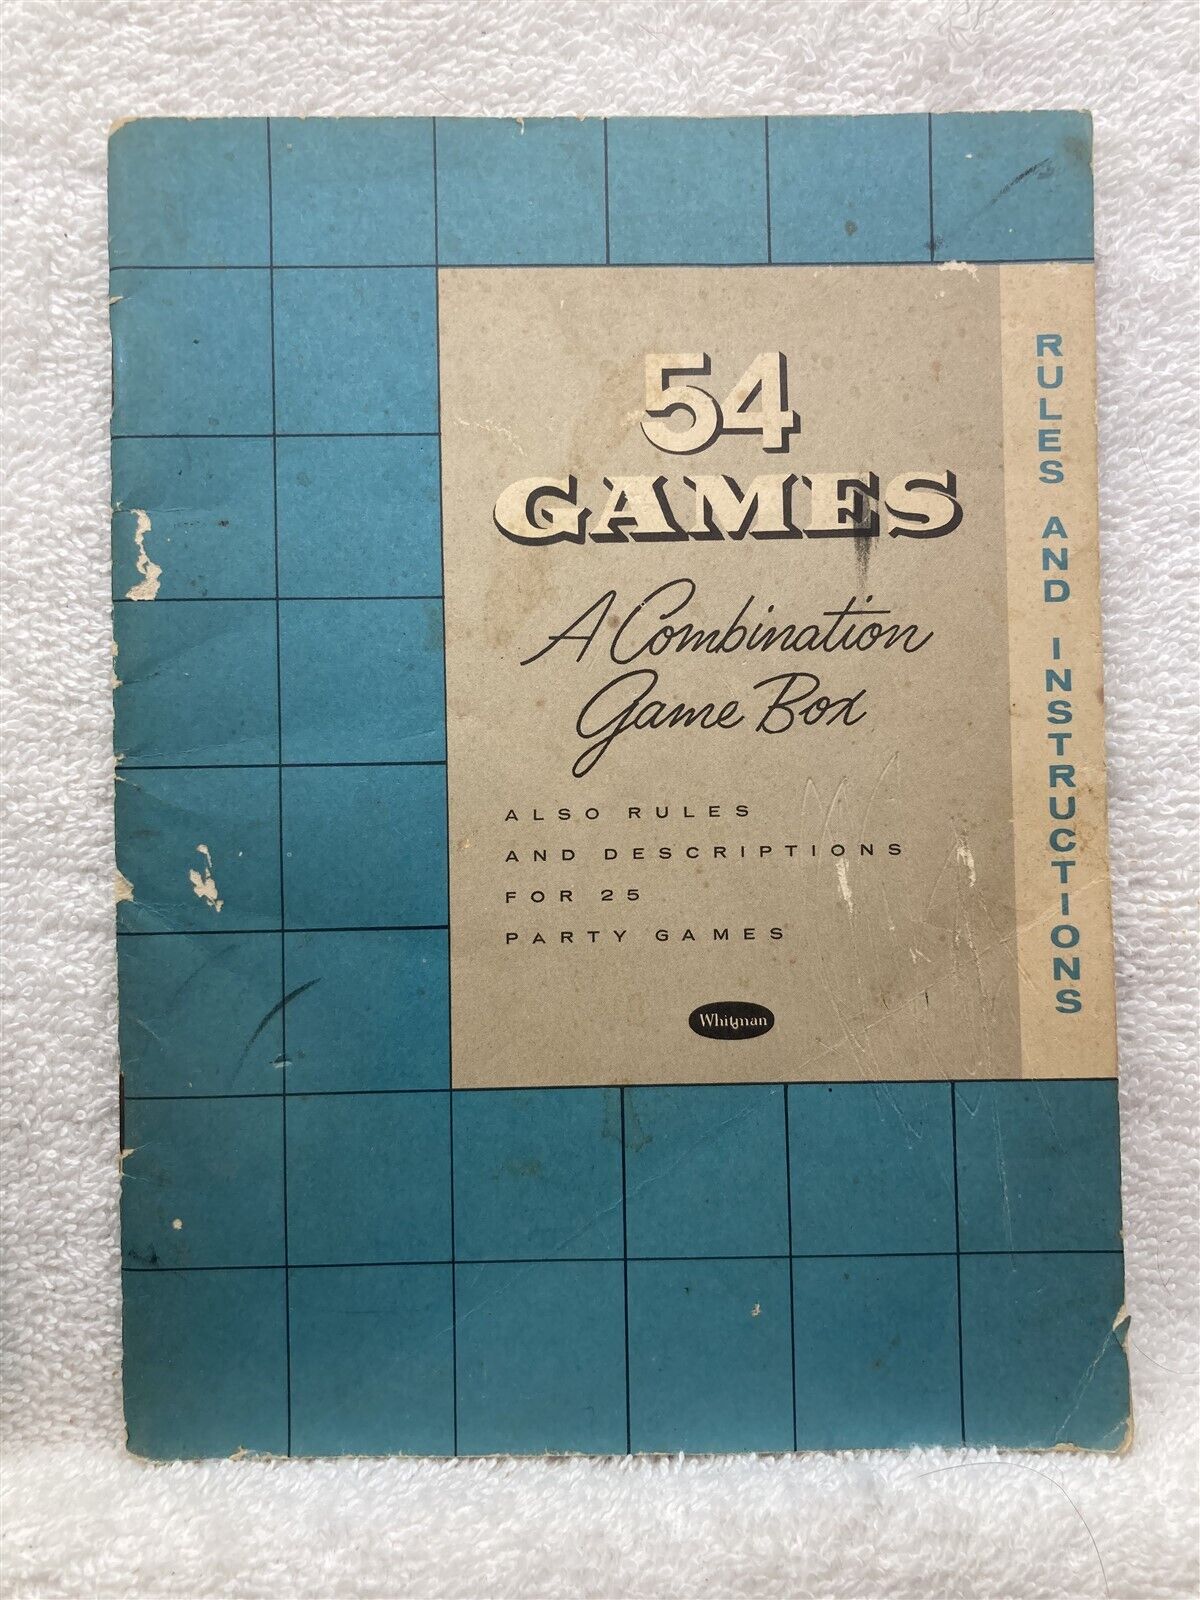 1948 54 Games Party Rules Book Whitman Publishing Combination Game Box Vtg